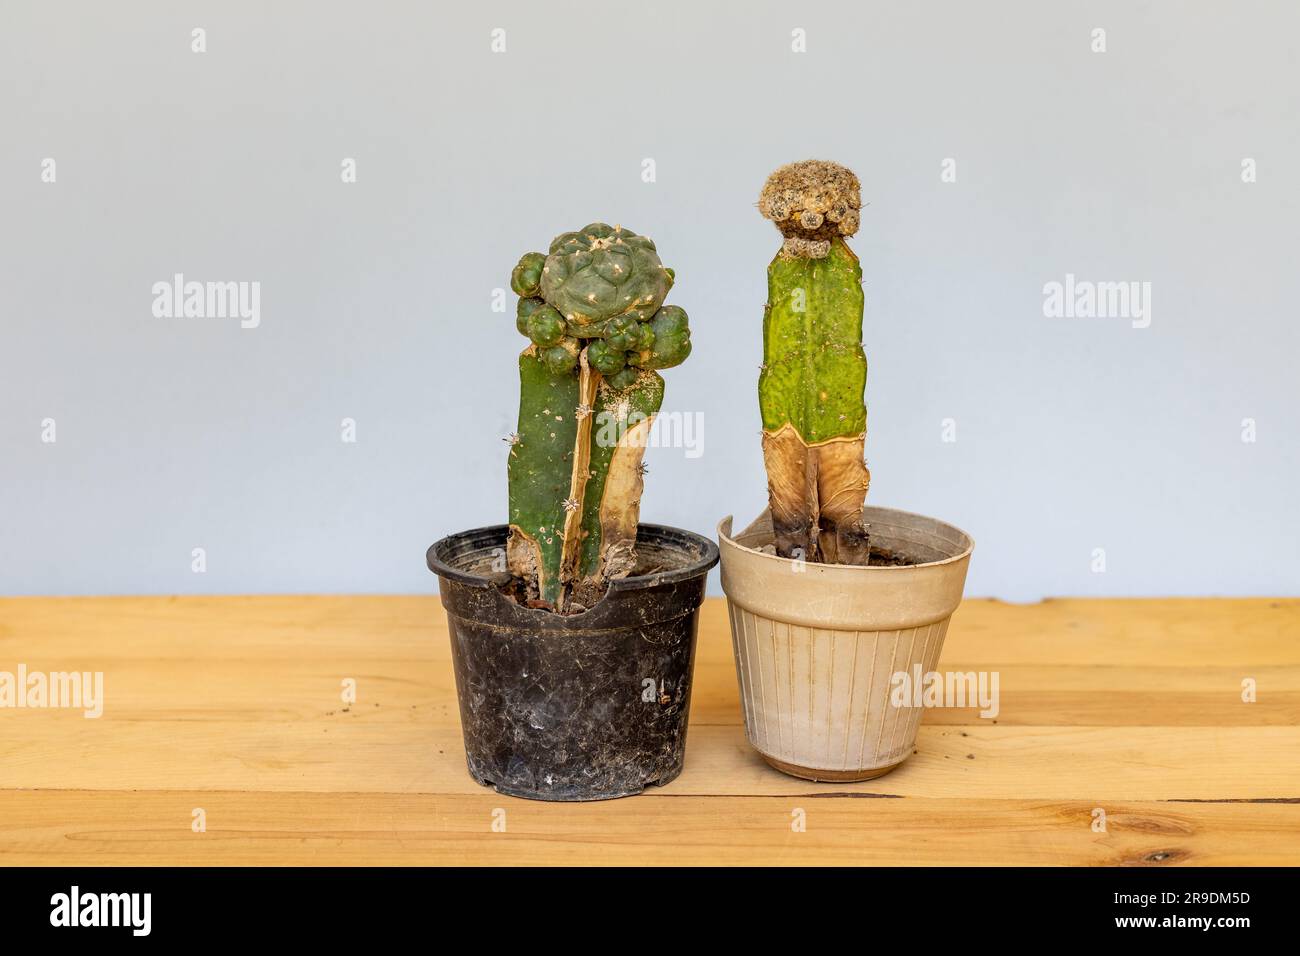 The dried cactus is dug up and thrown out of the pot. Care and cultivation of indoor plants. Stock Photo